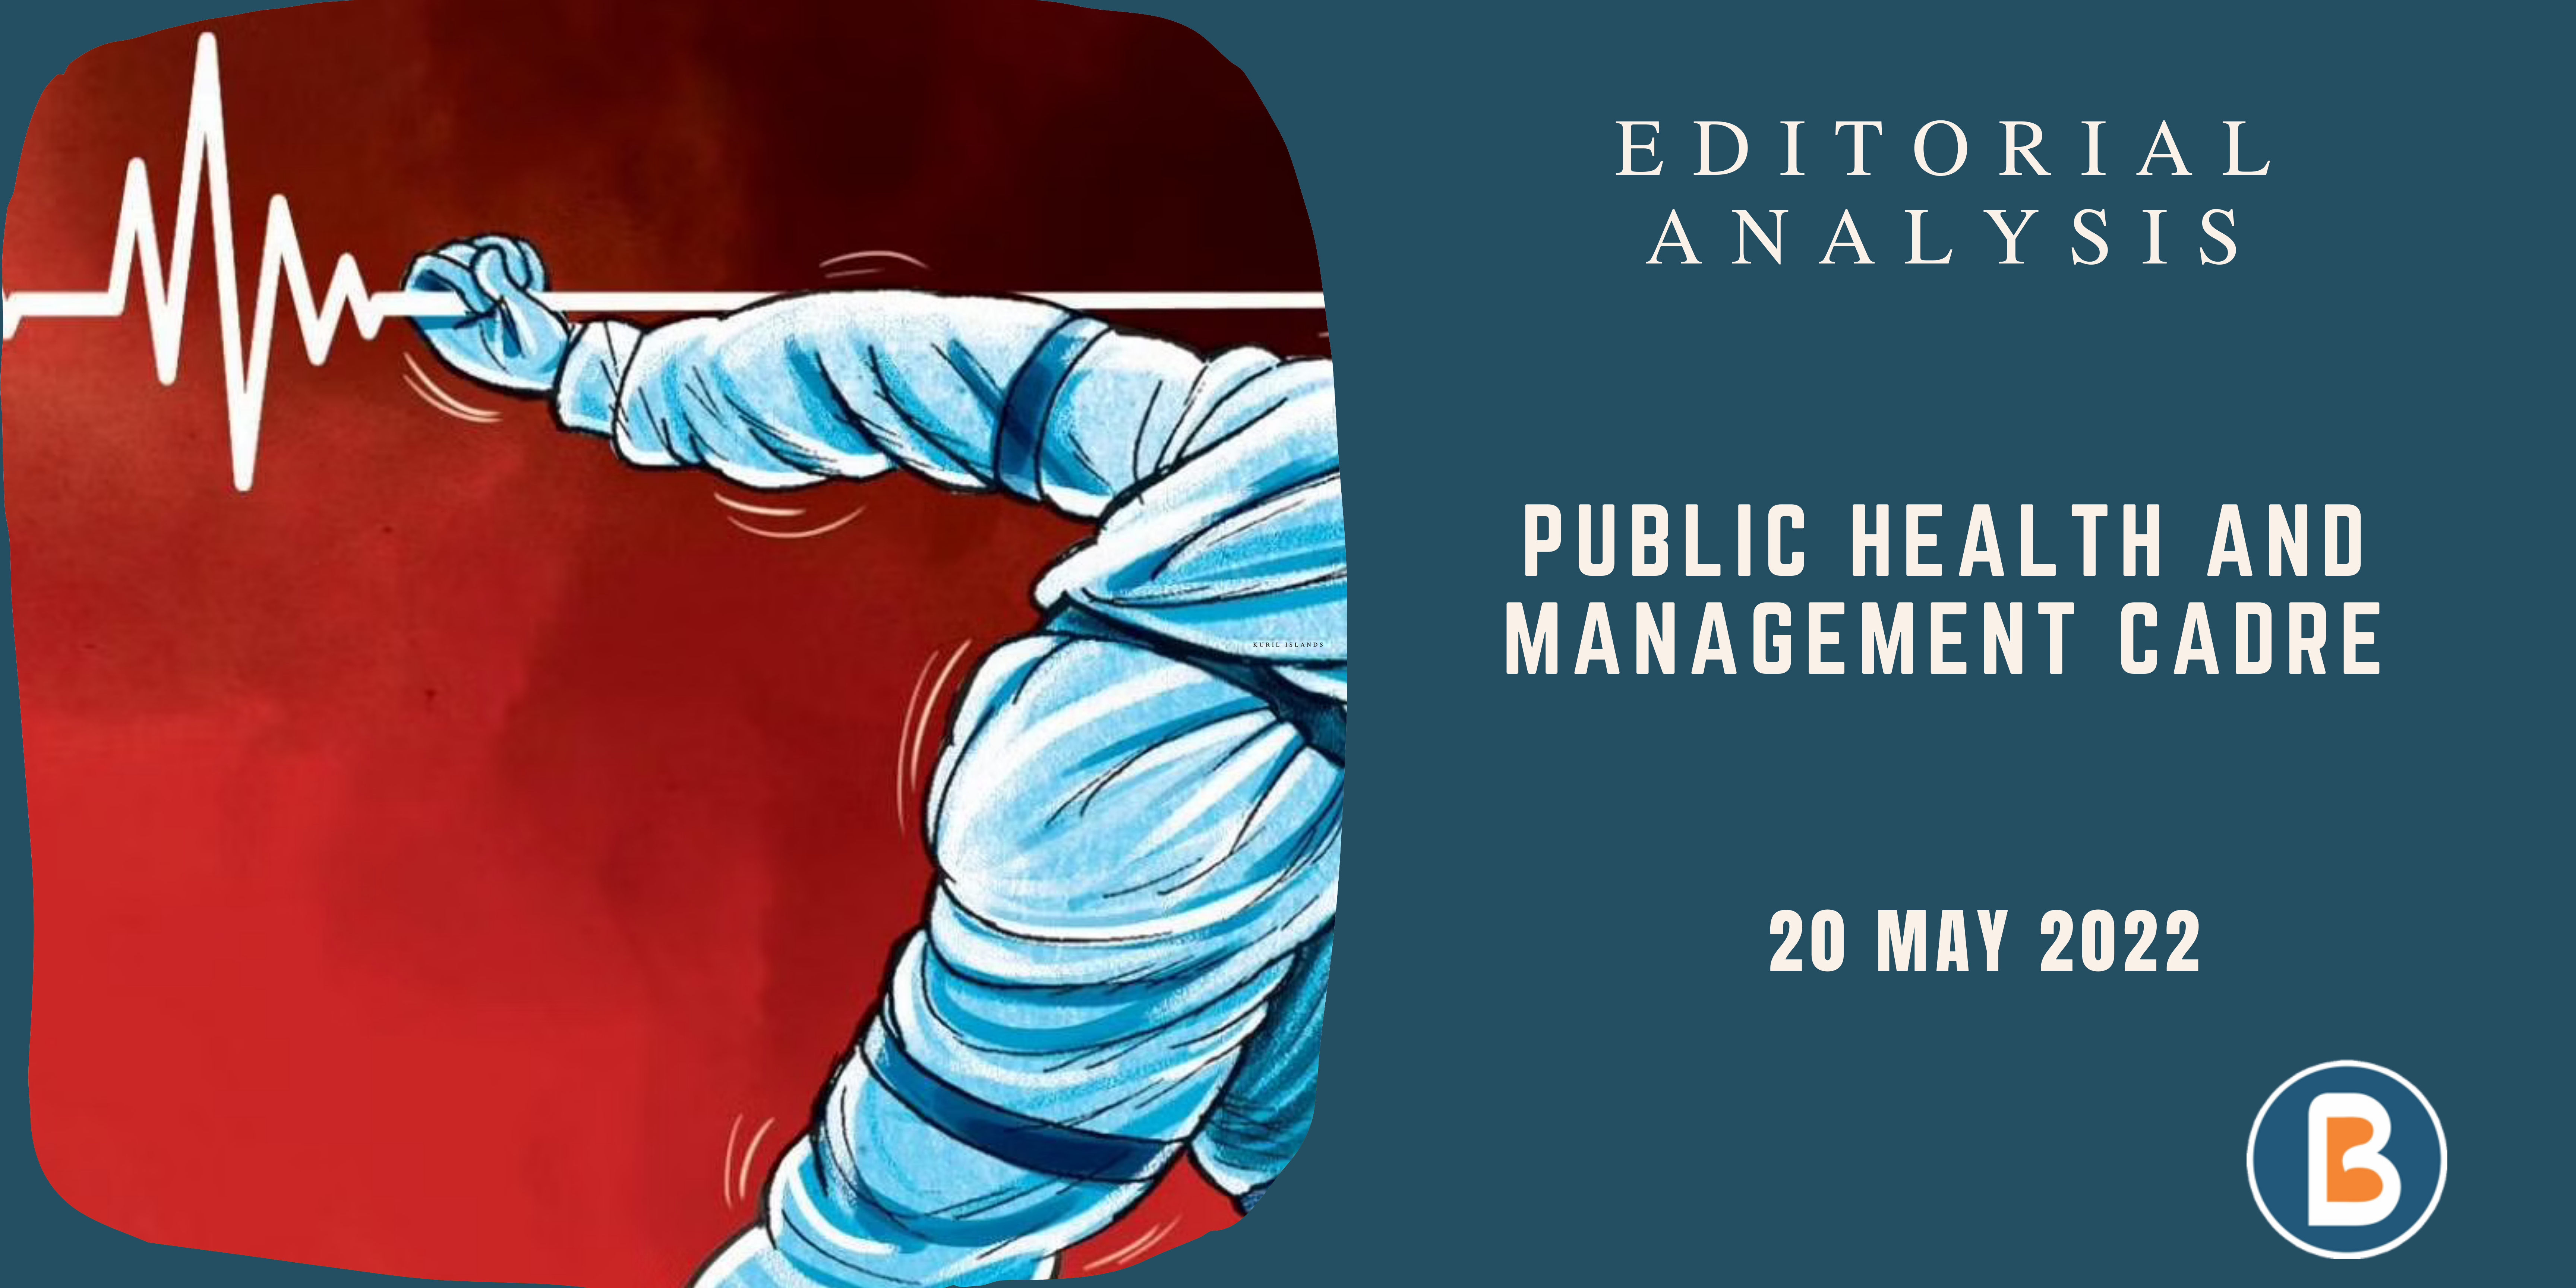 Editorial Analysis for UPSC - Public health and management cadre